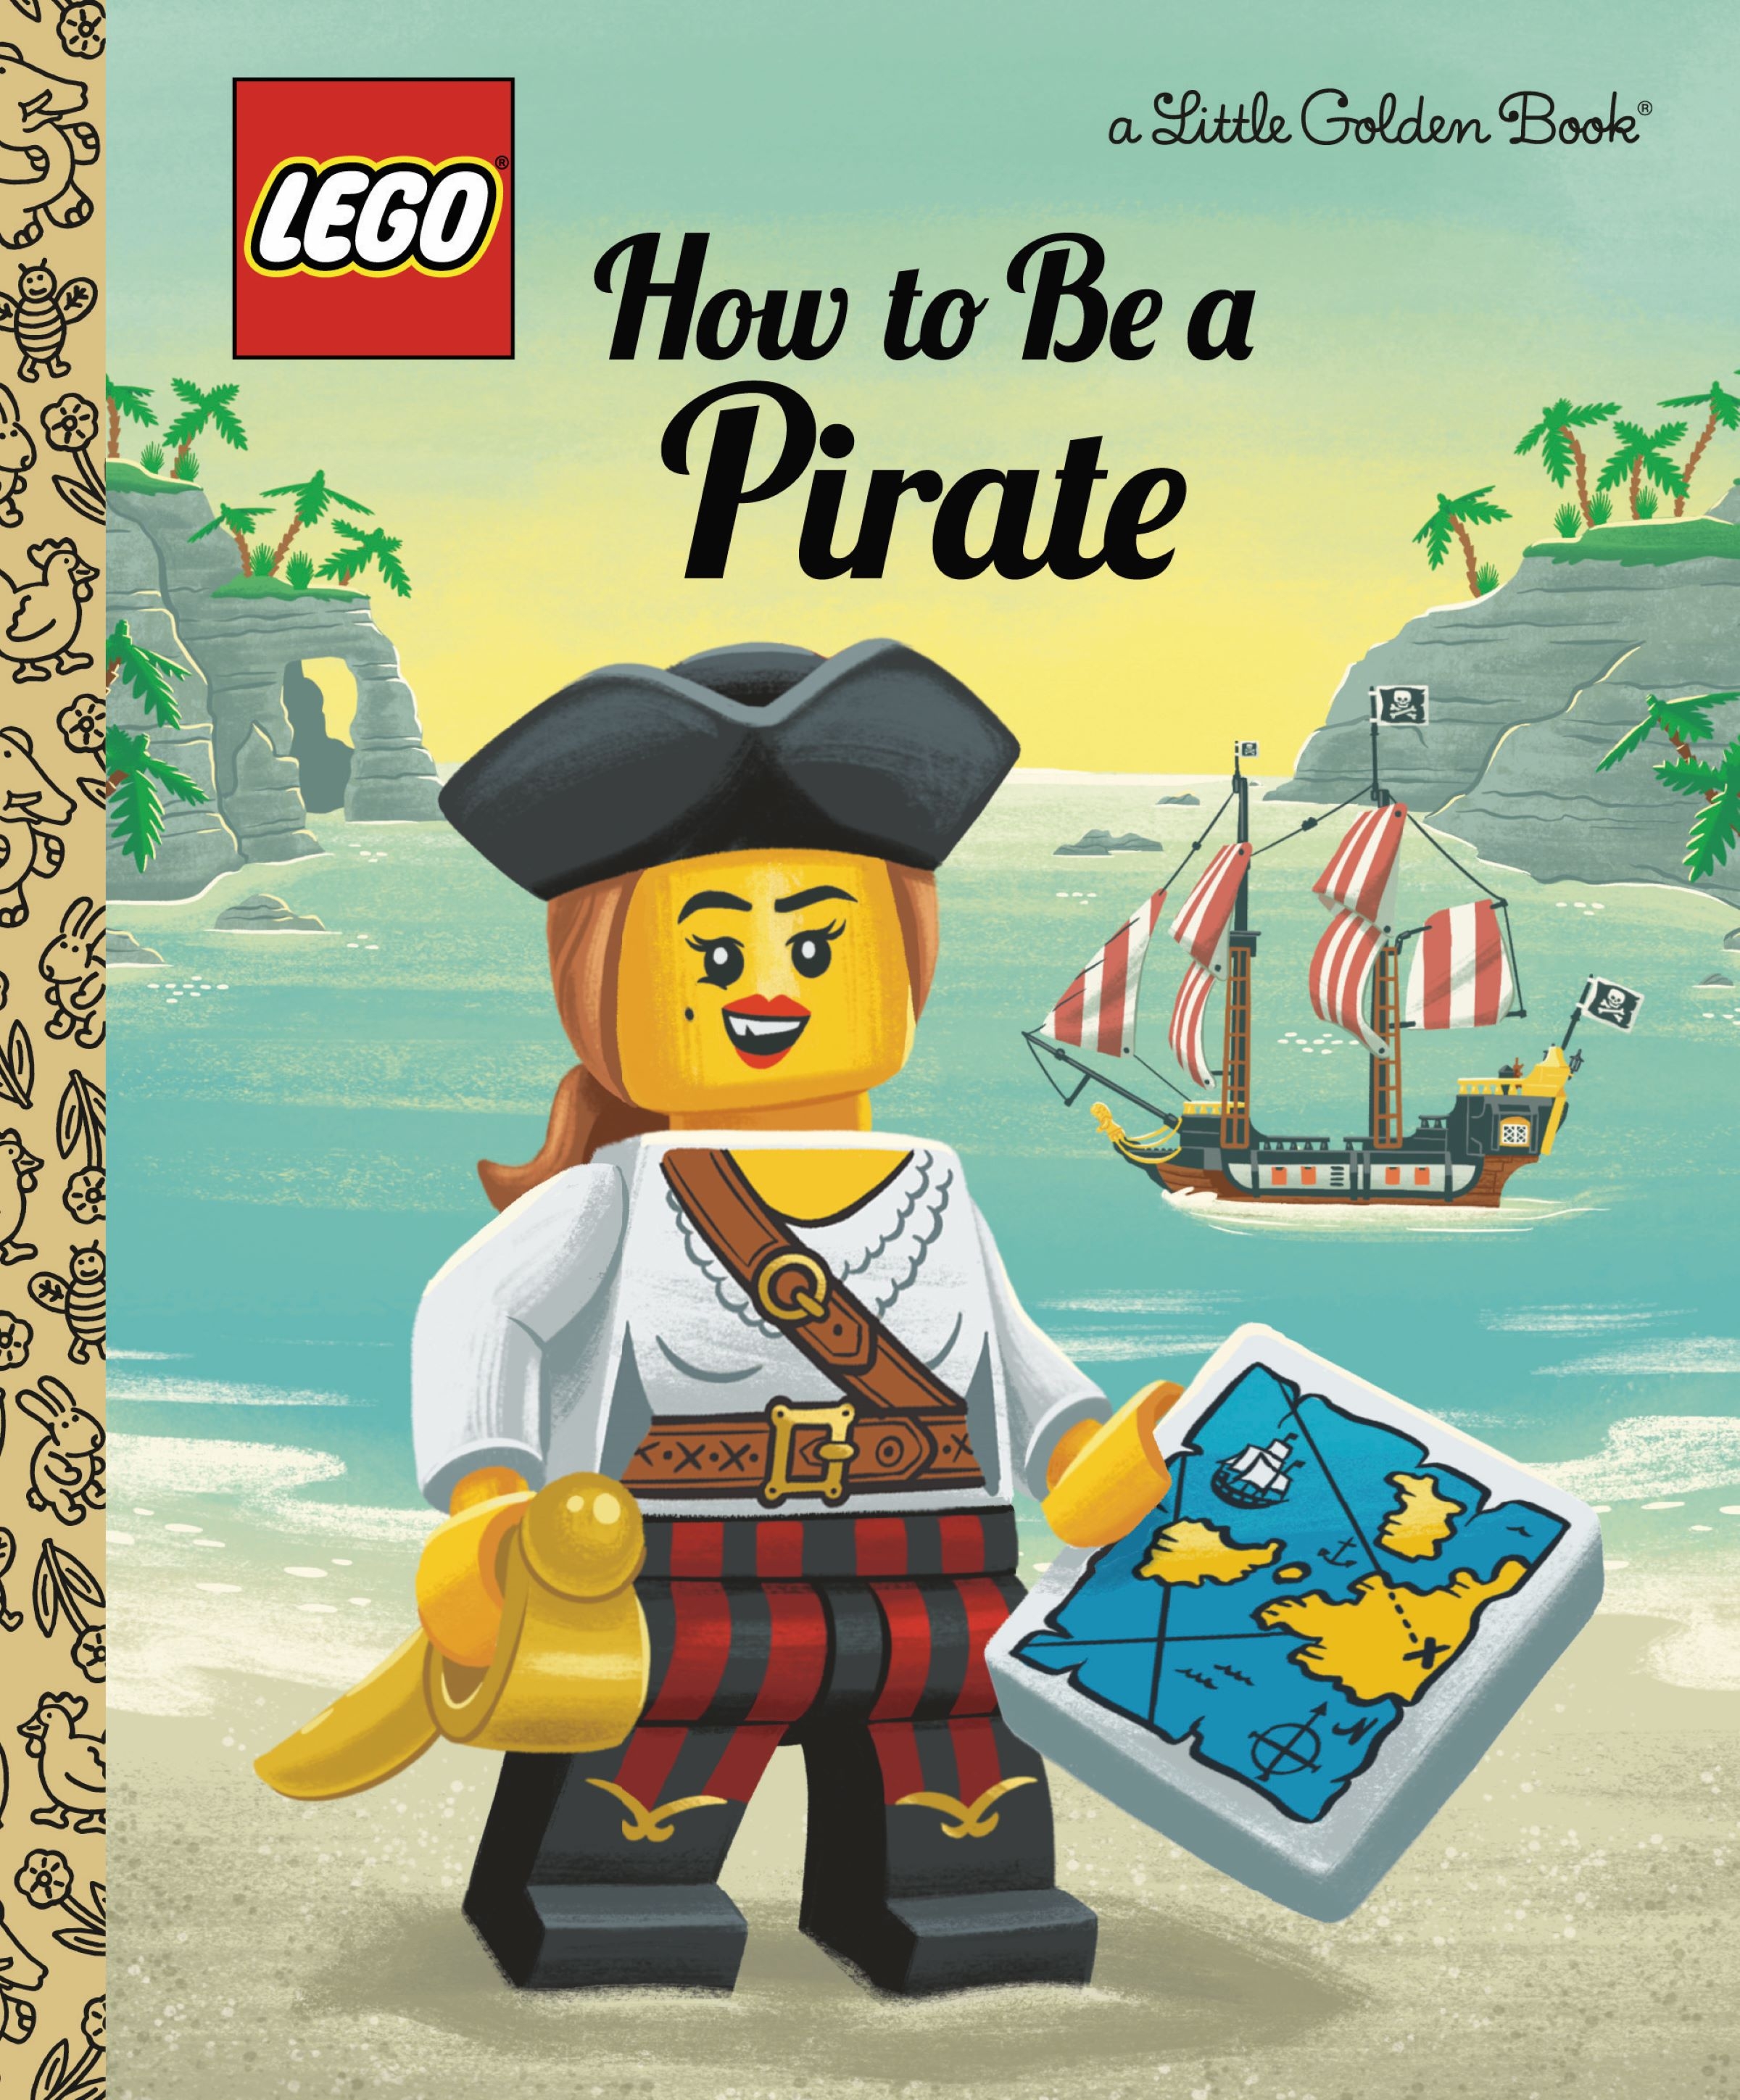 How to Be a Pirate 5007469, Other